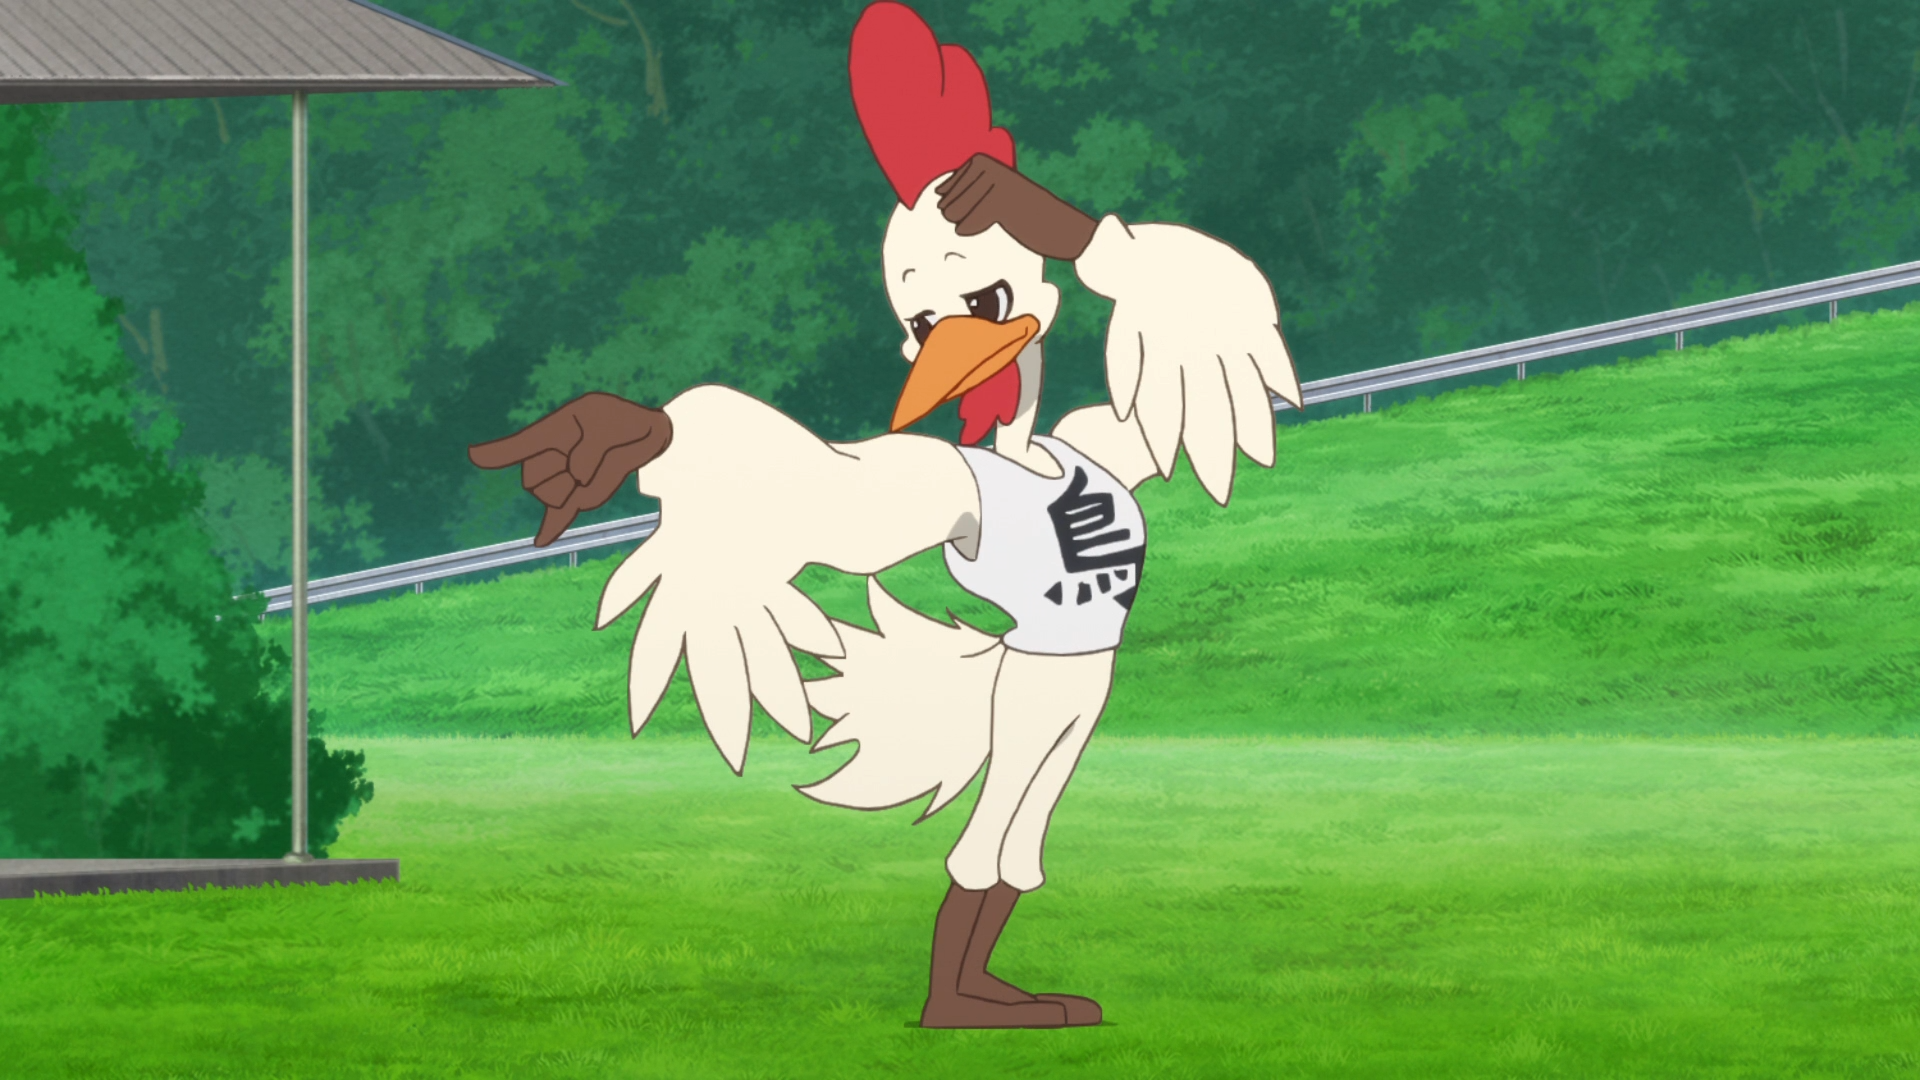 Cocco-kun, the mascot for the Drive-In Tori restaurant, strikes a dance pose in a scene from the ZOMBIE LAND SAGA TV anime.